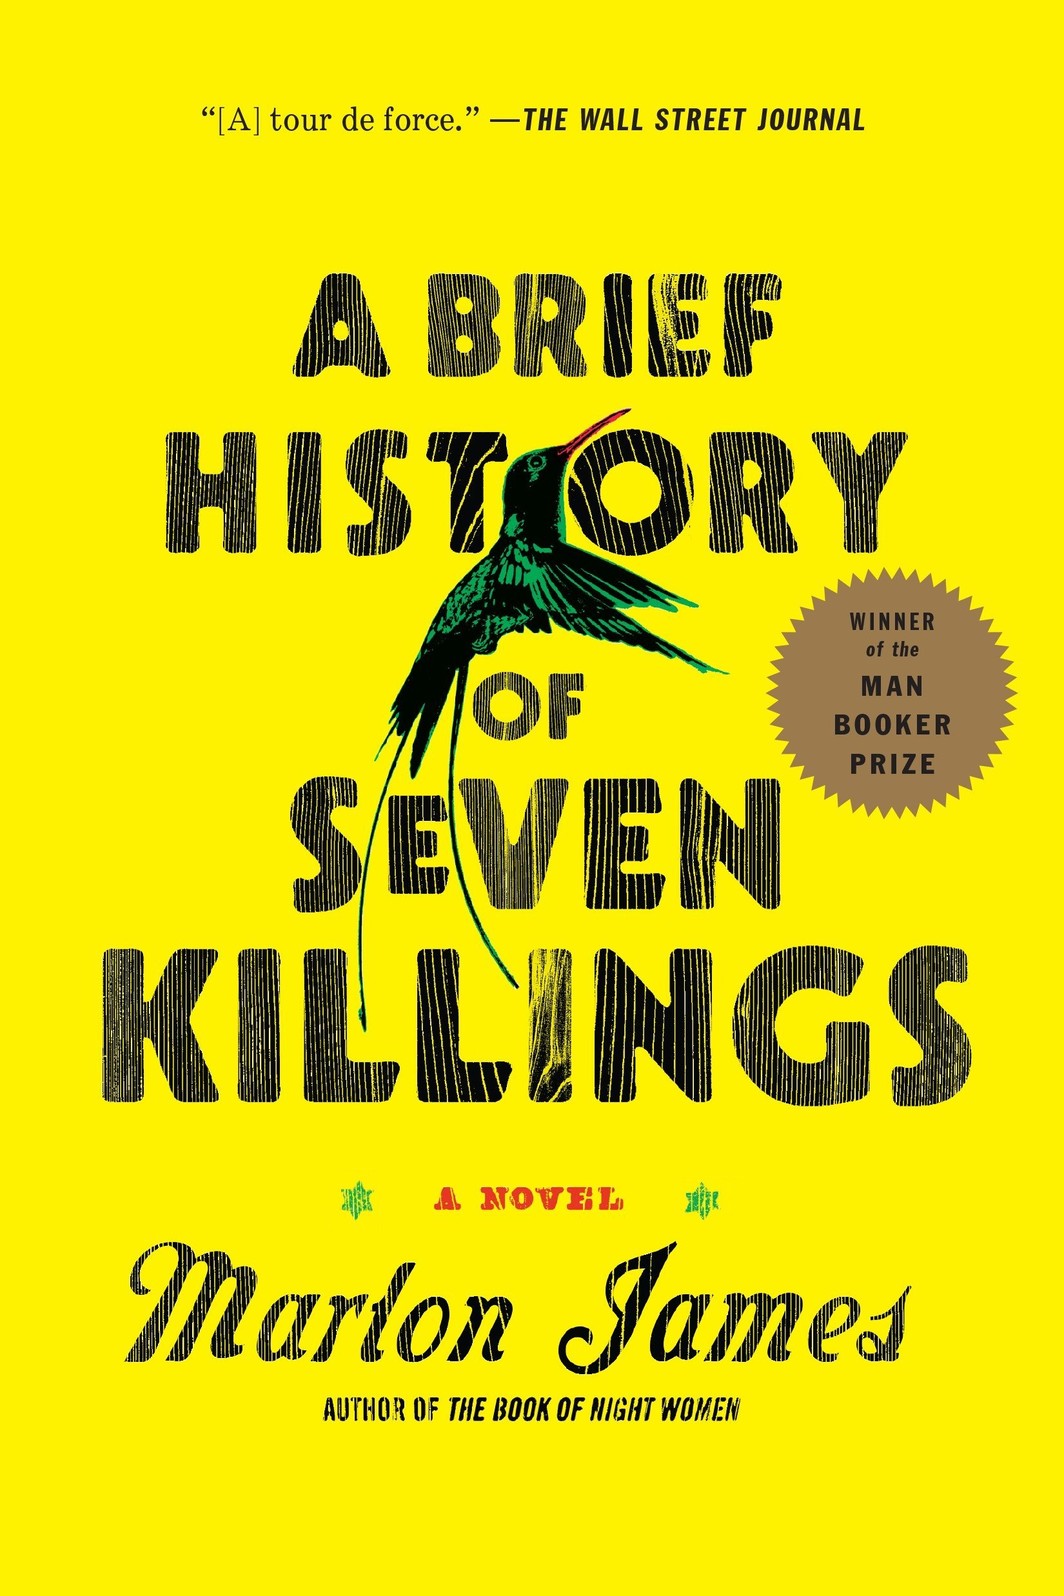 The cover of A Brief History of Seven Killings: A Novel